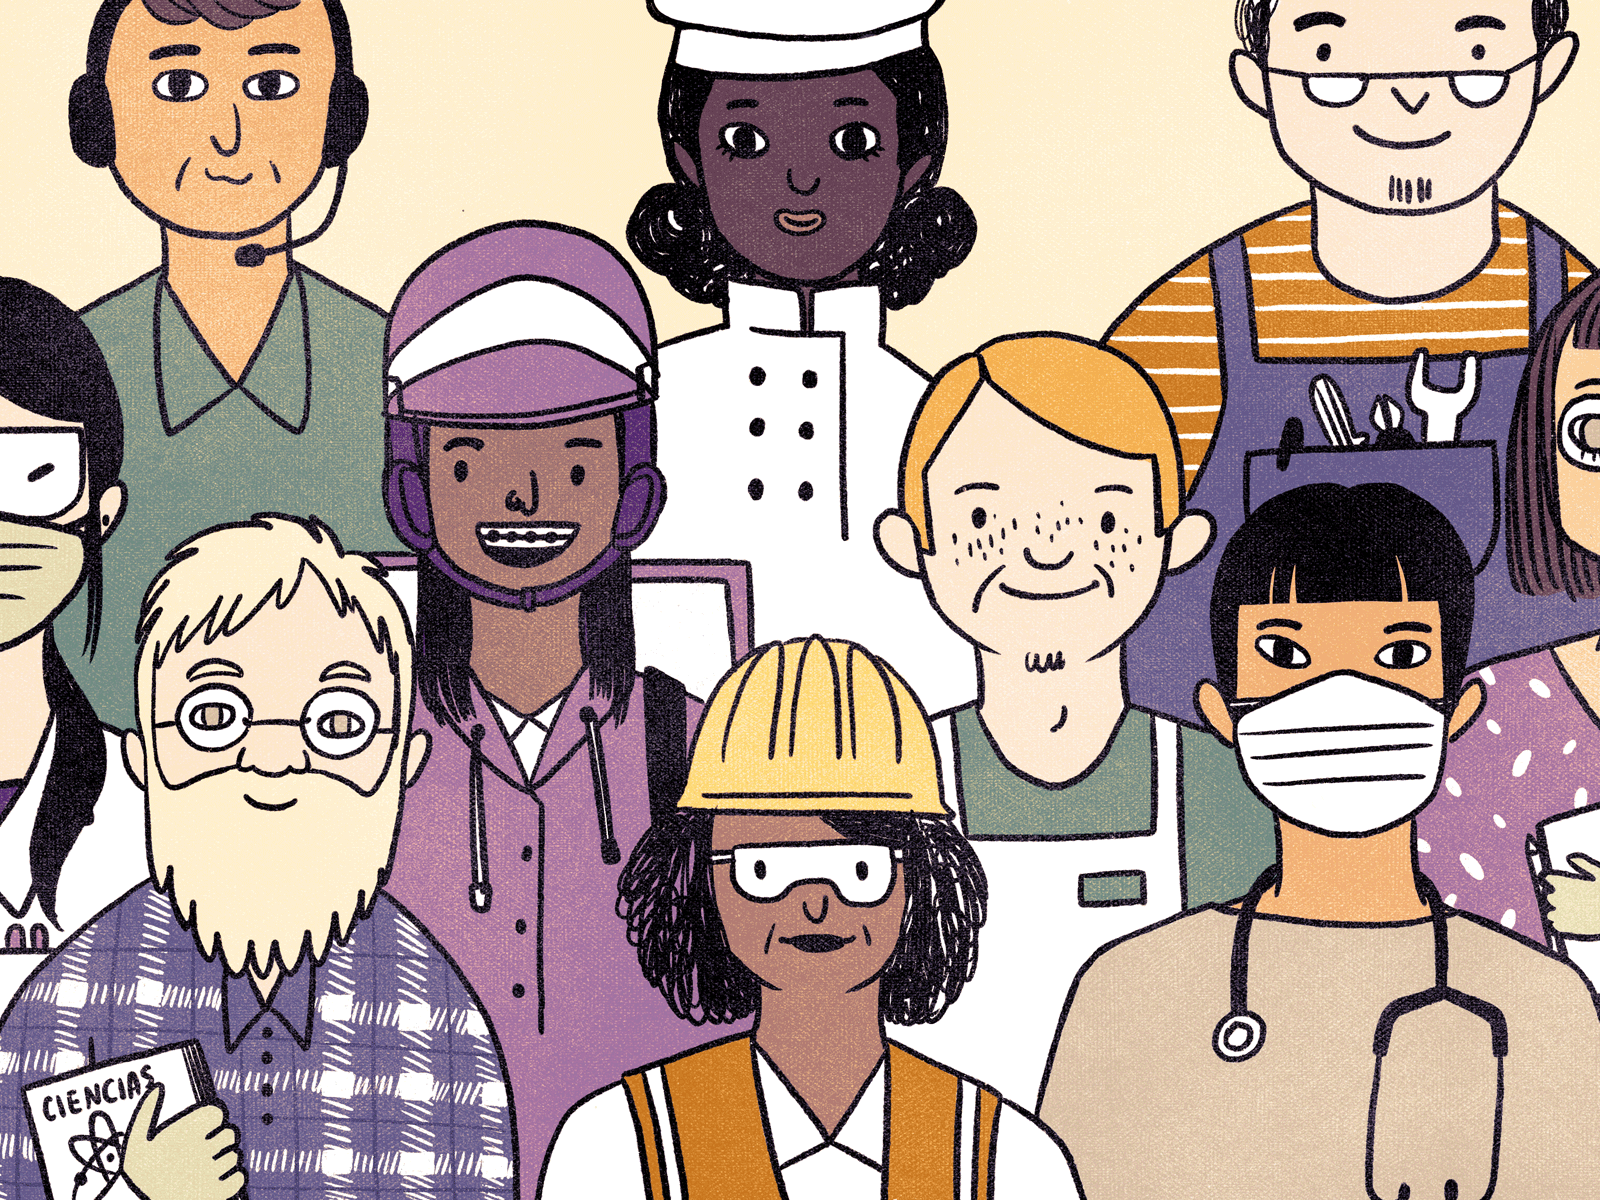 Labour Day 2020 by Valeria Cafagna on Dribbble